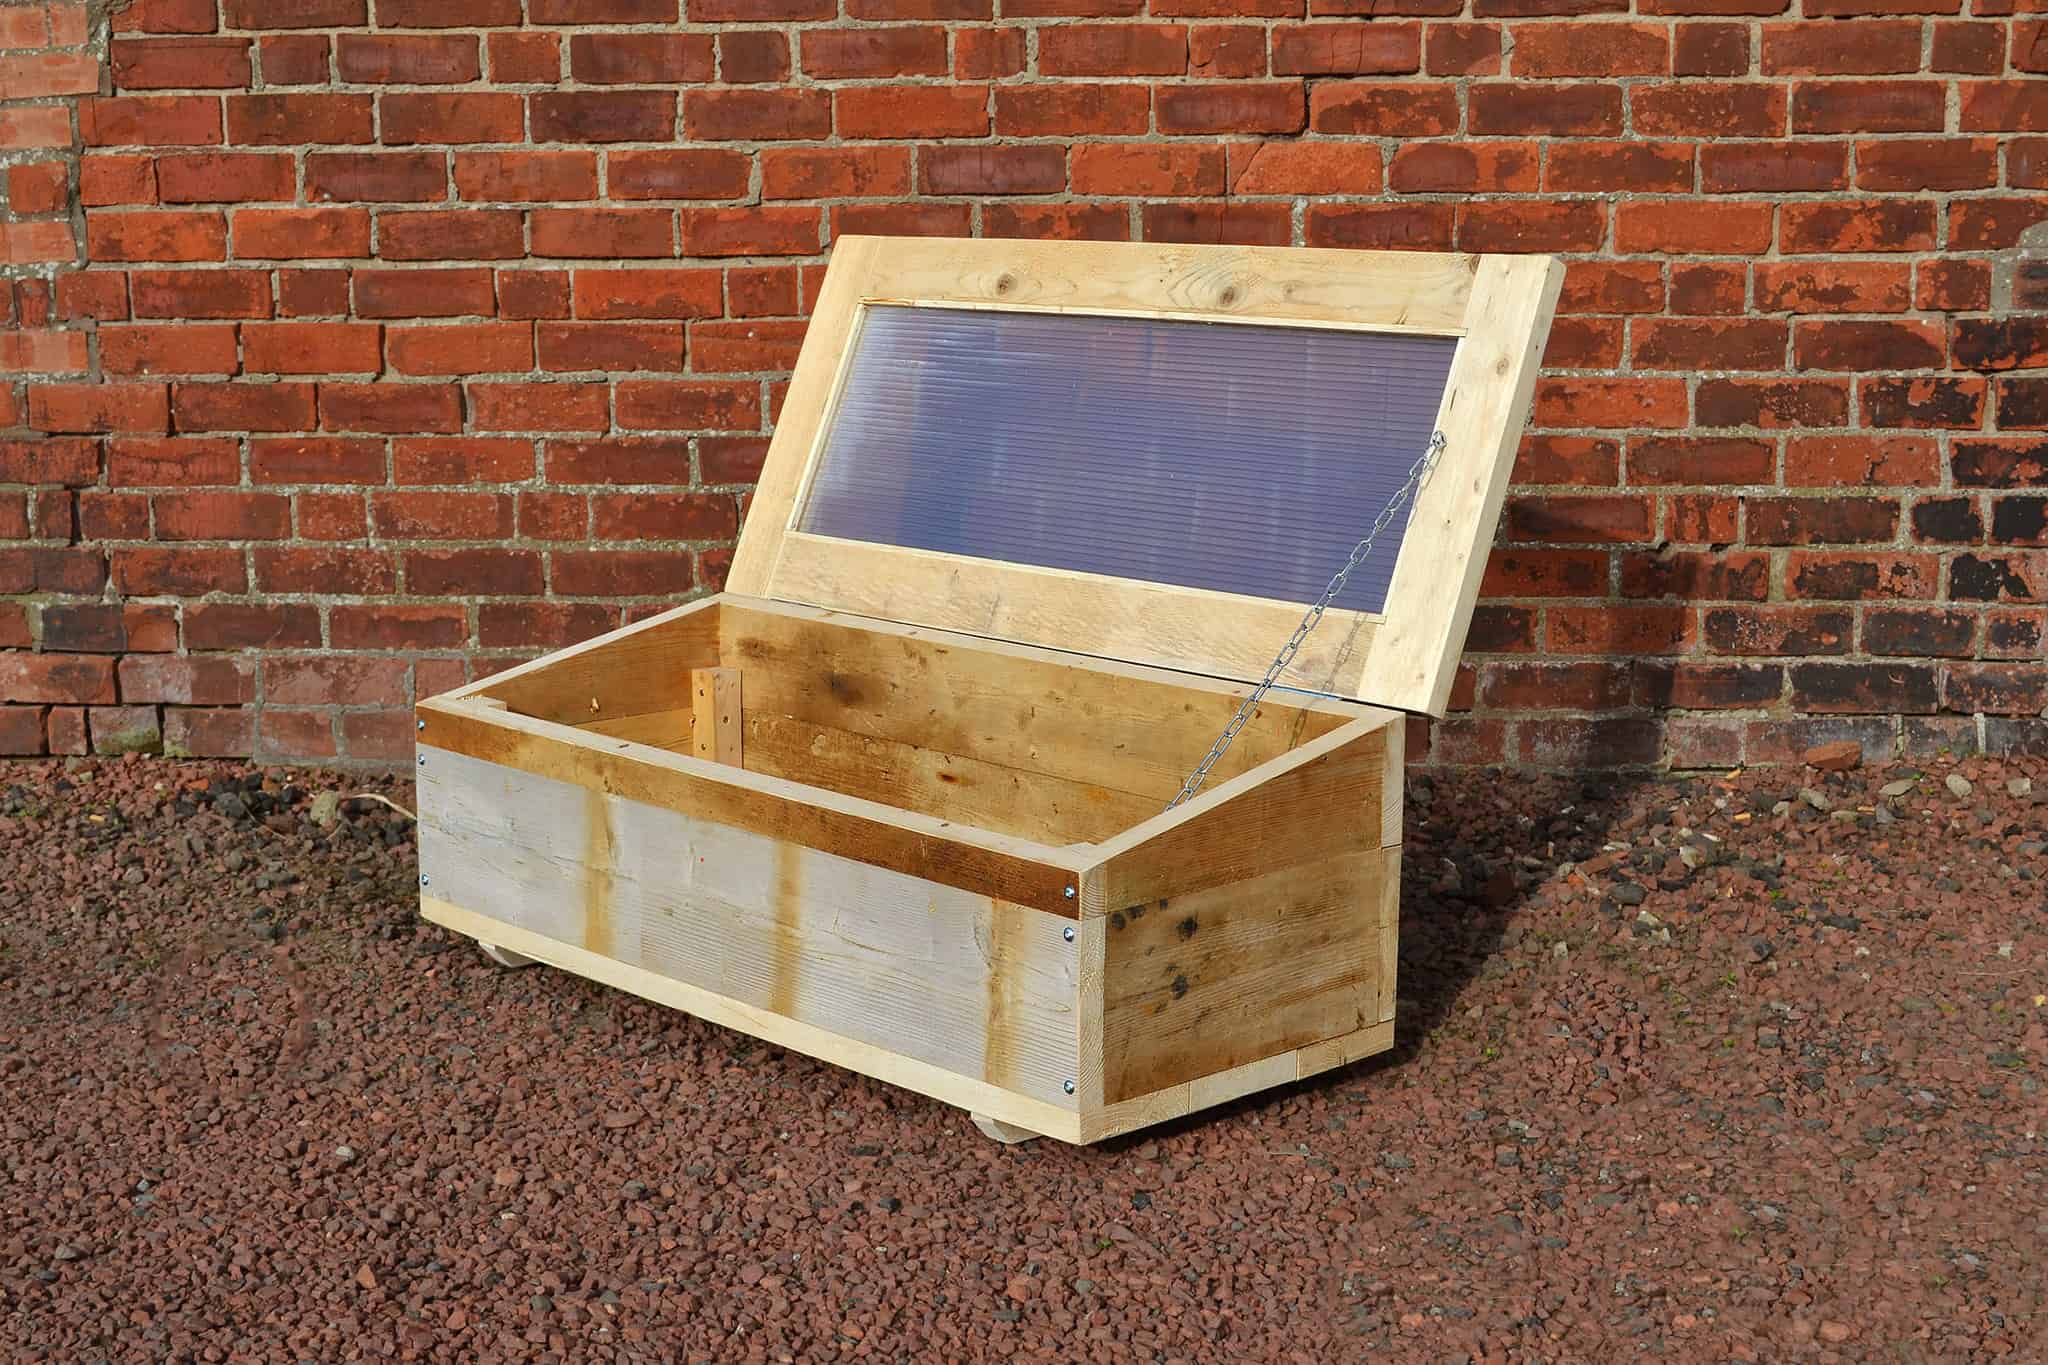 Cold Frame, smooth finish